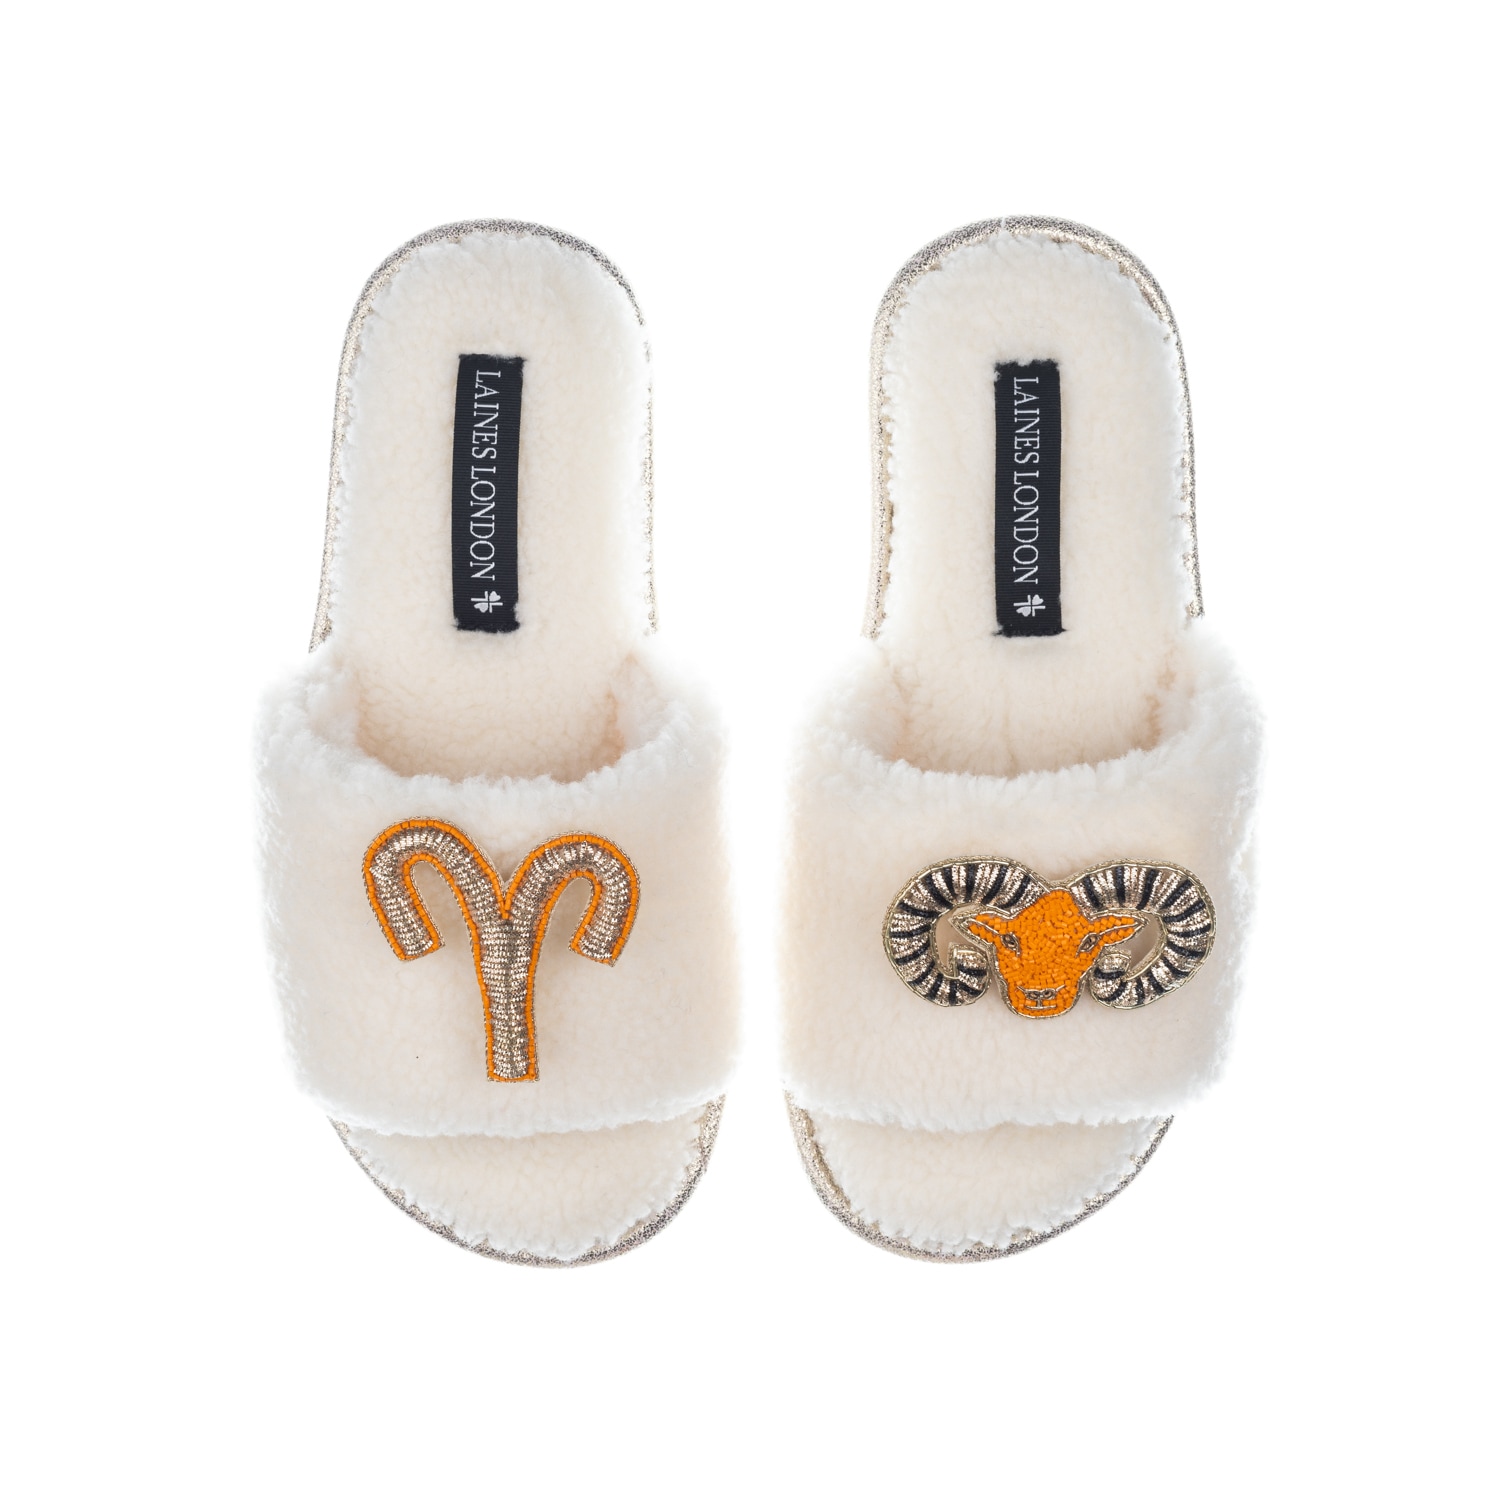 Laines London Women's White Teddy Towelling Slipper Sliders With Aries Zodiac Brooches - Cream